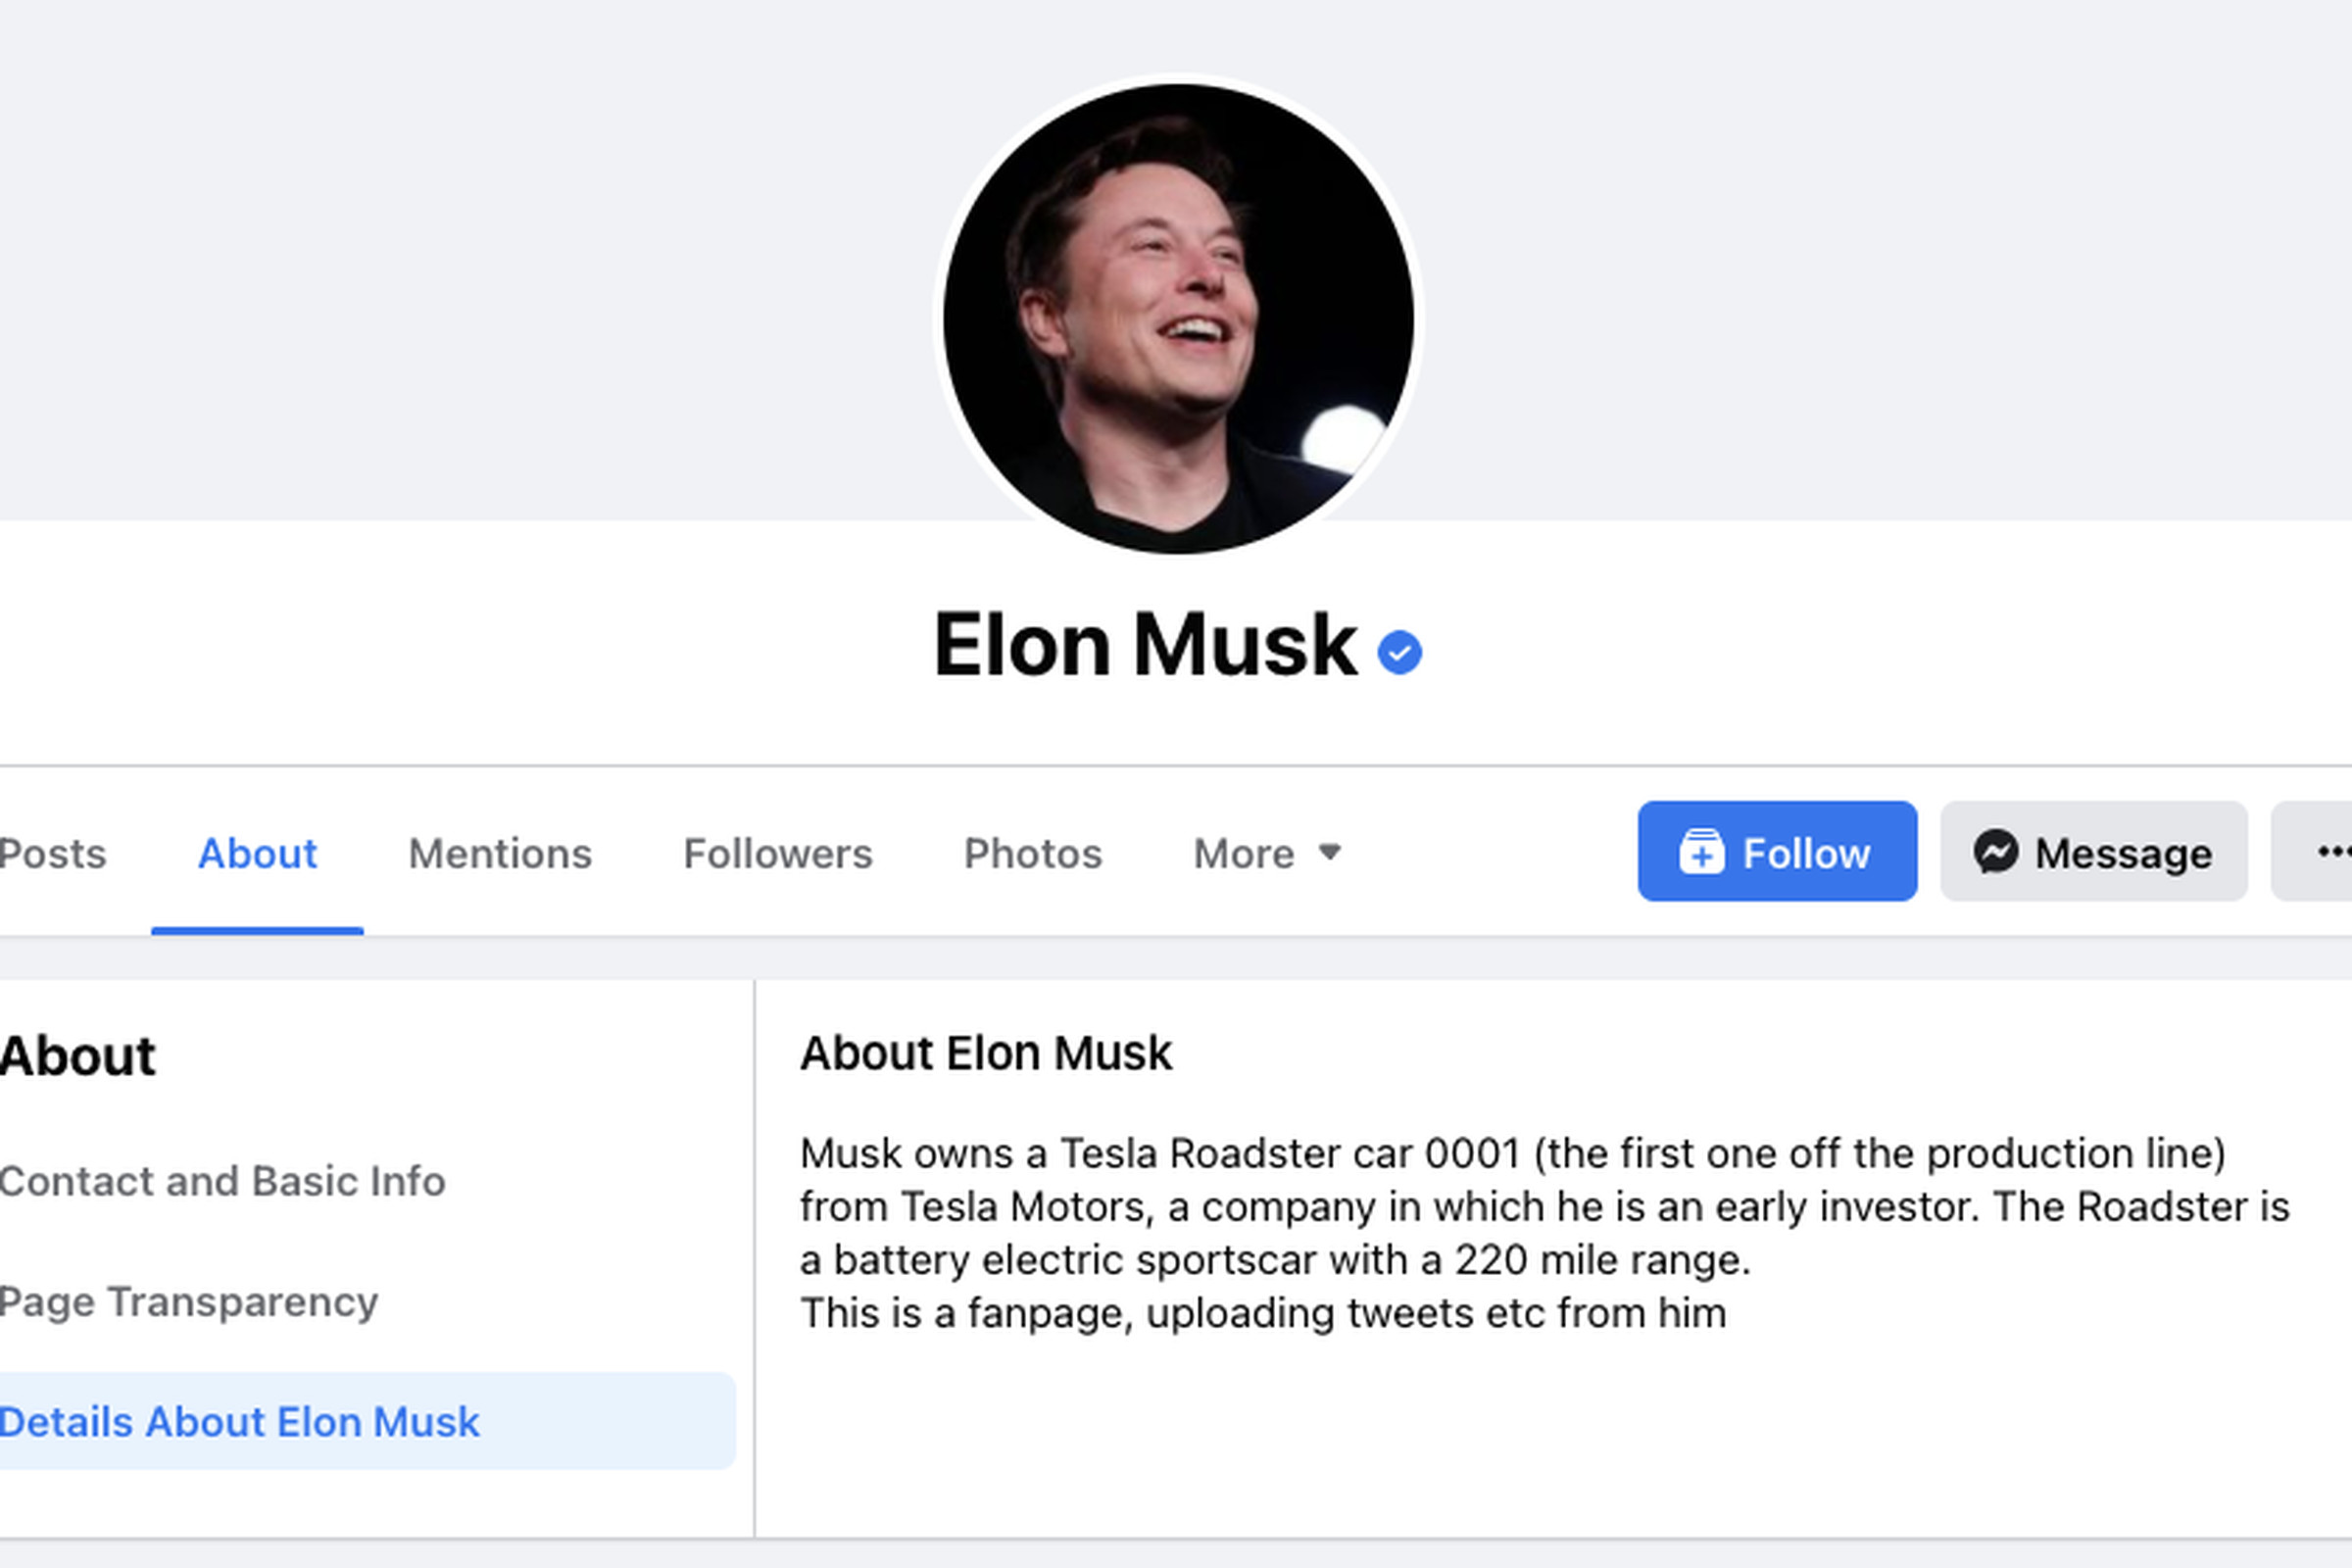 This is the fan page verified as Elon Musk.